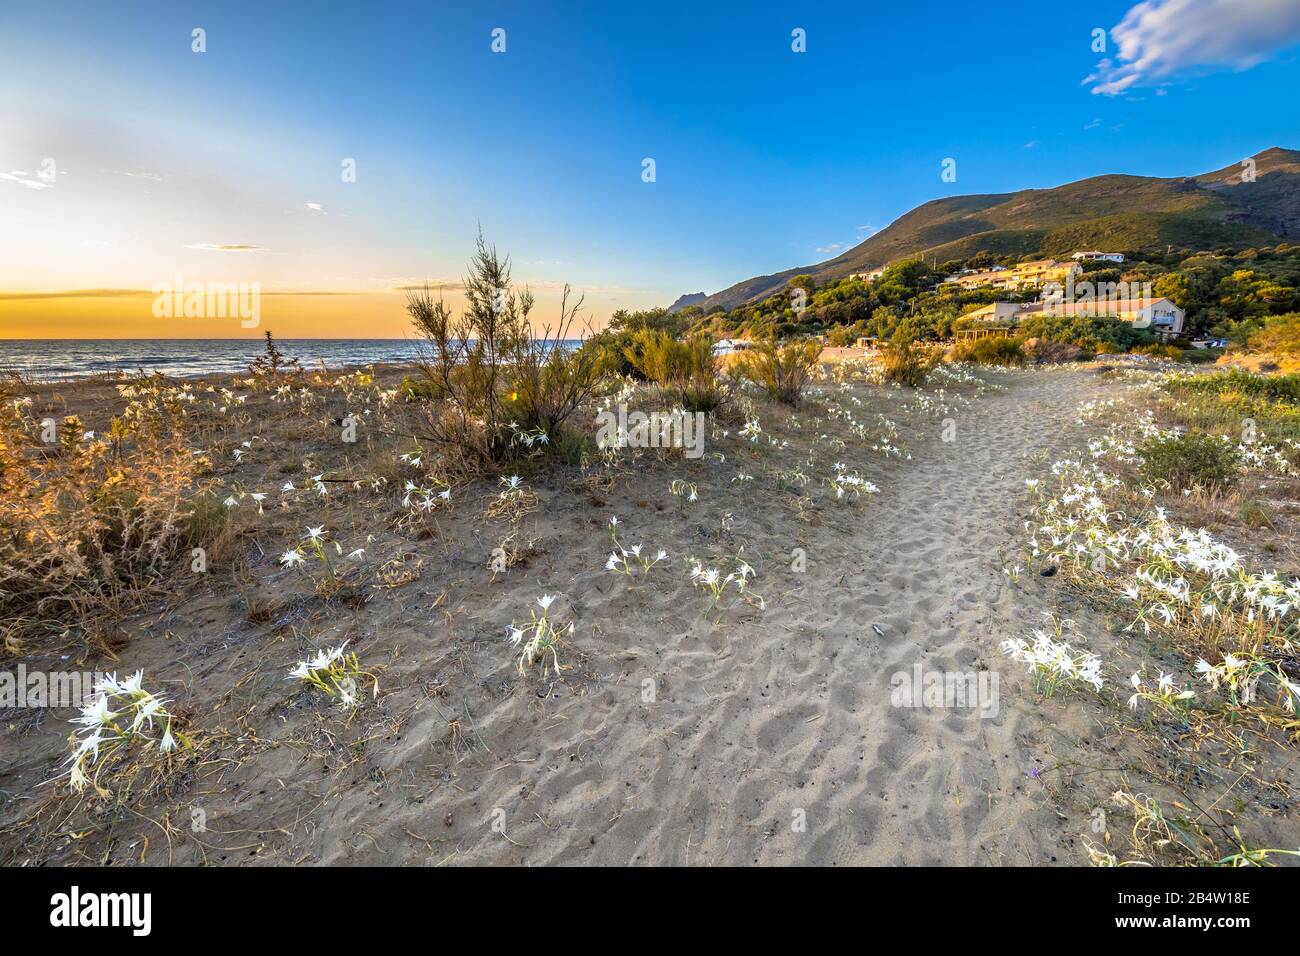 Illyrian sea lily (Pancratium illyricum) white flowers blooming in dunes on Corsican beach of Farinole on Cap Corse, Corsica, France Stock Photo